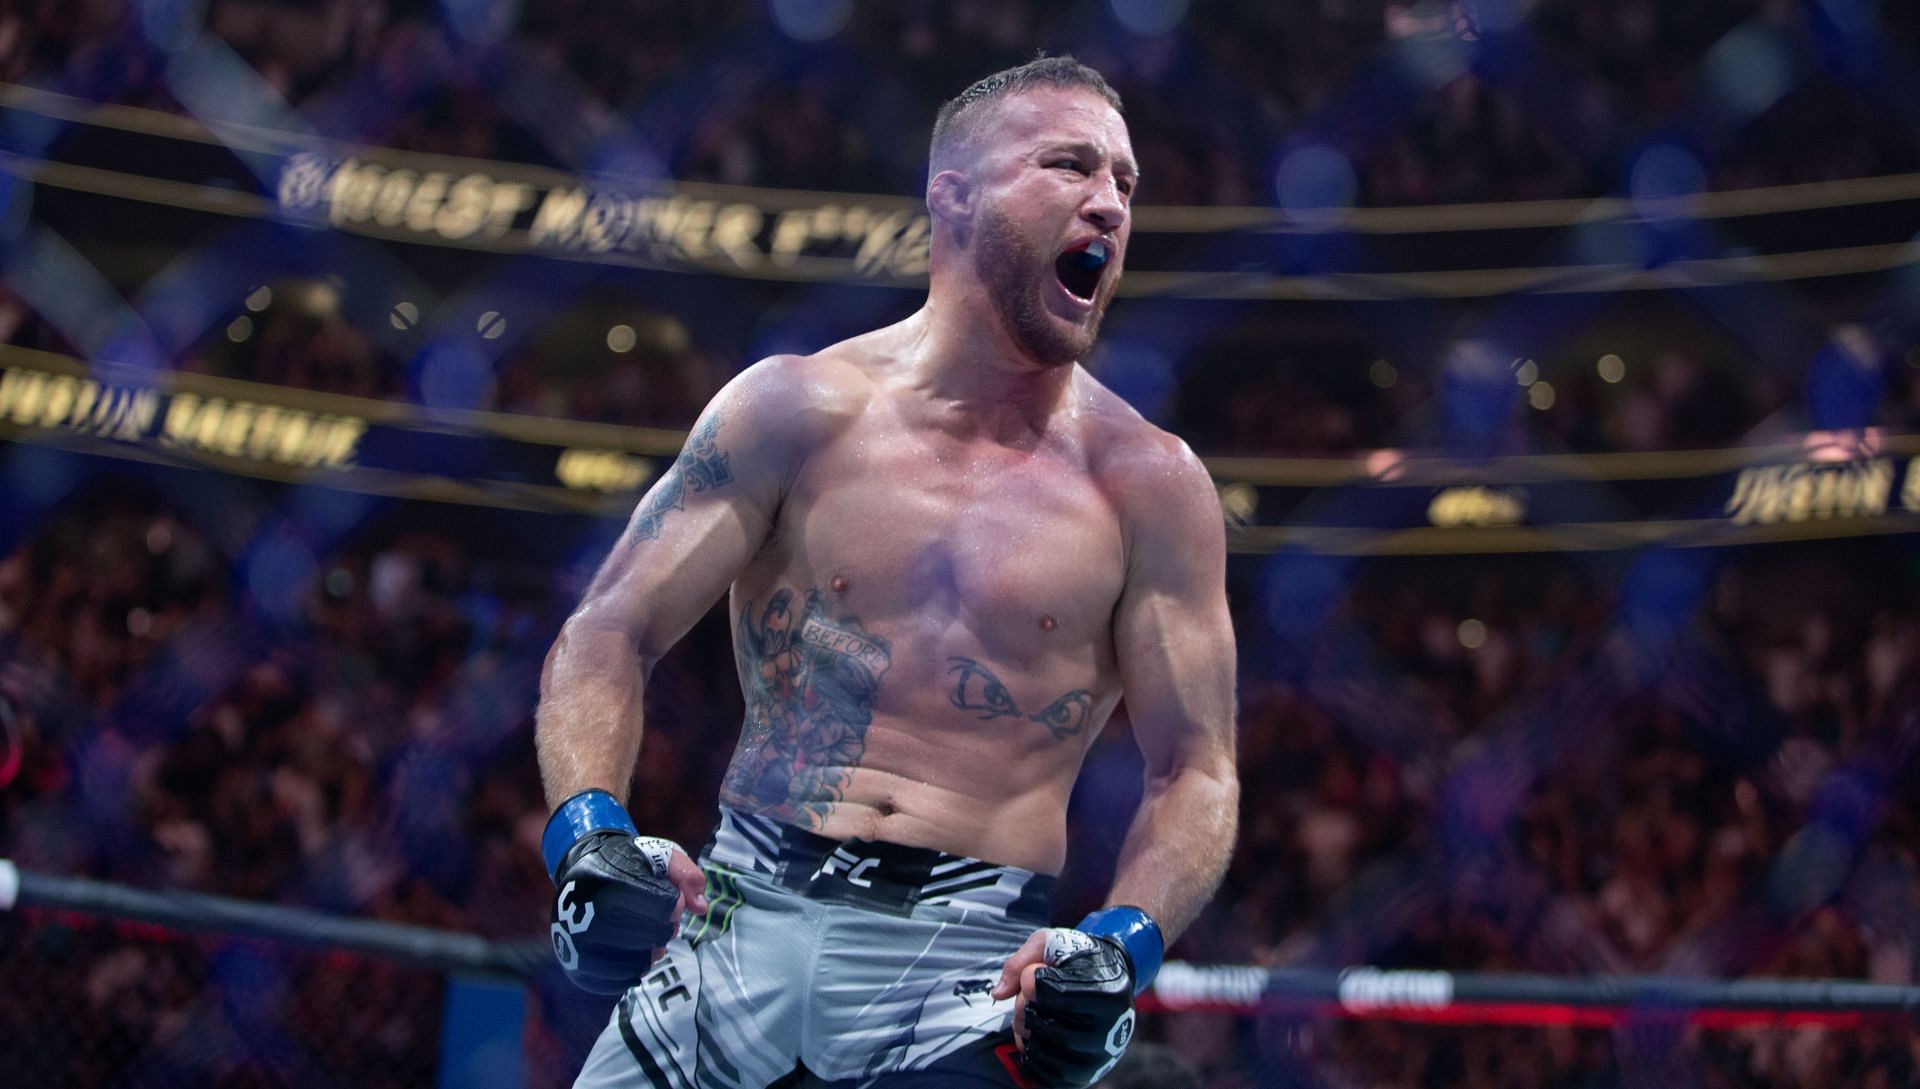 Justin Gaethje has earned a title shot at 155lbs